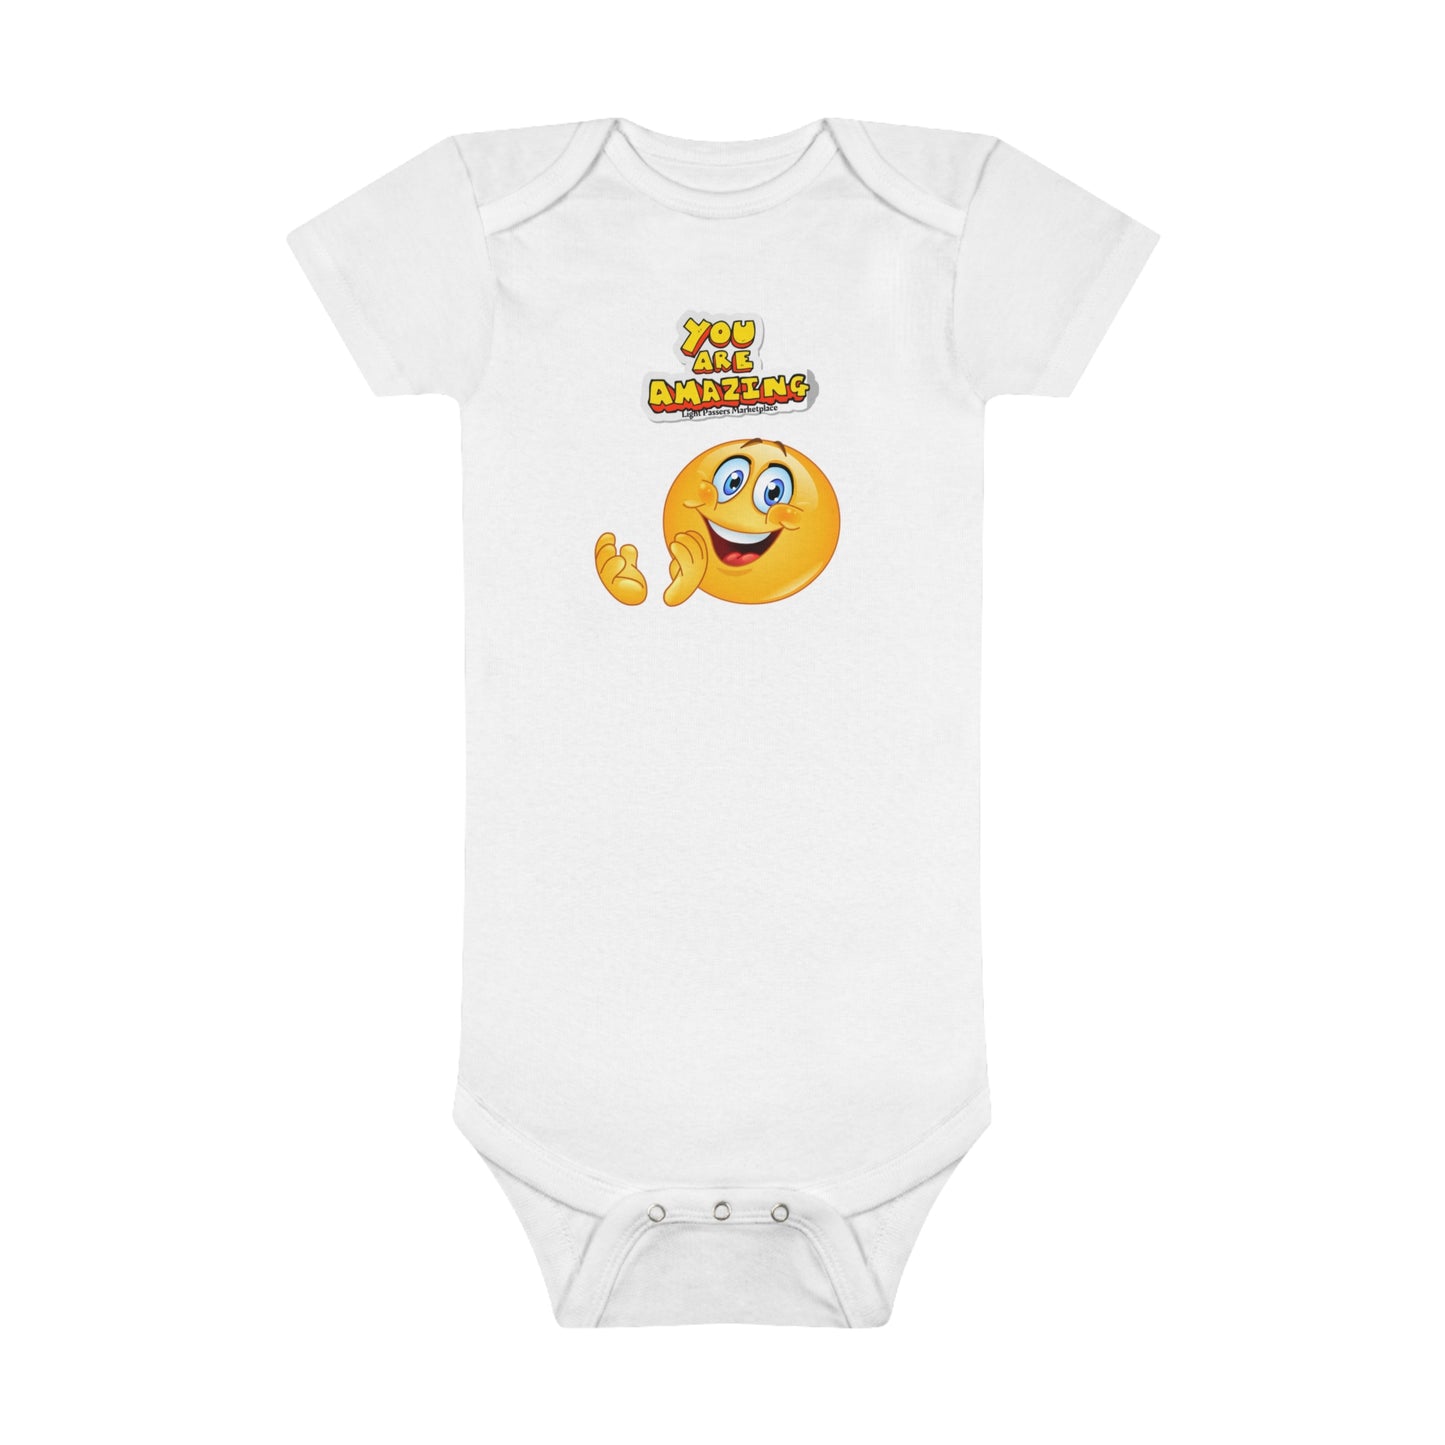 Light Passers Marketplace You are Amazing Infant Baby onesie T-shirts, Simple Messages, Mental Health